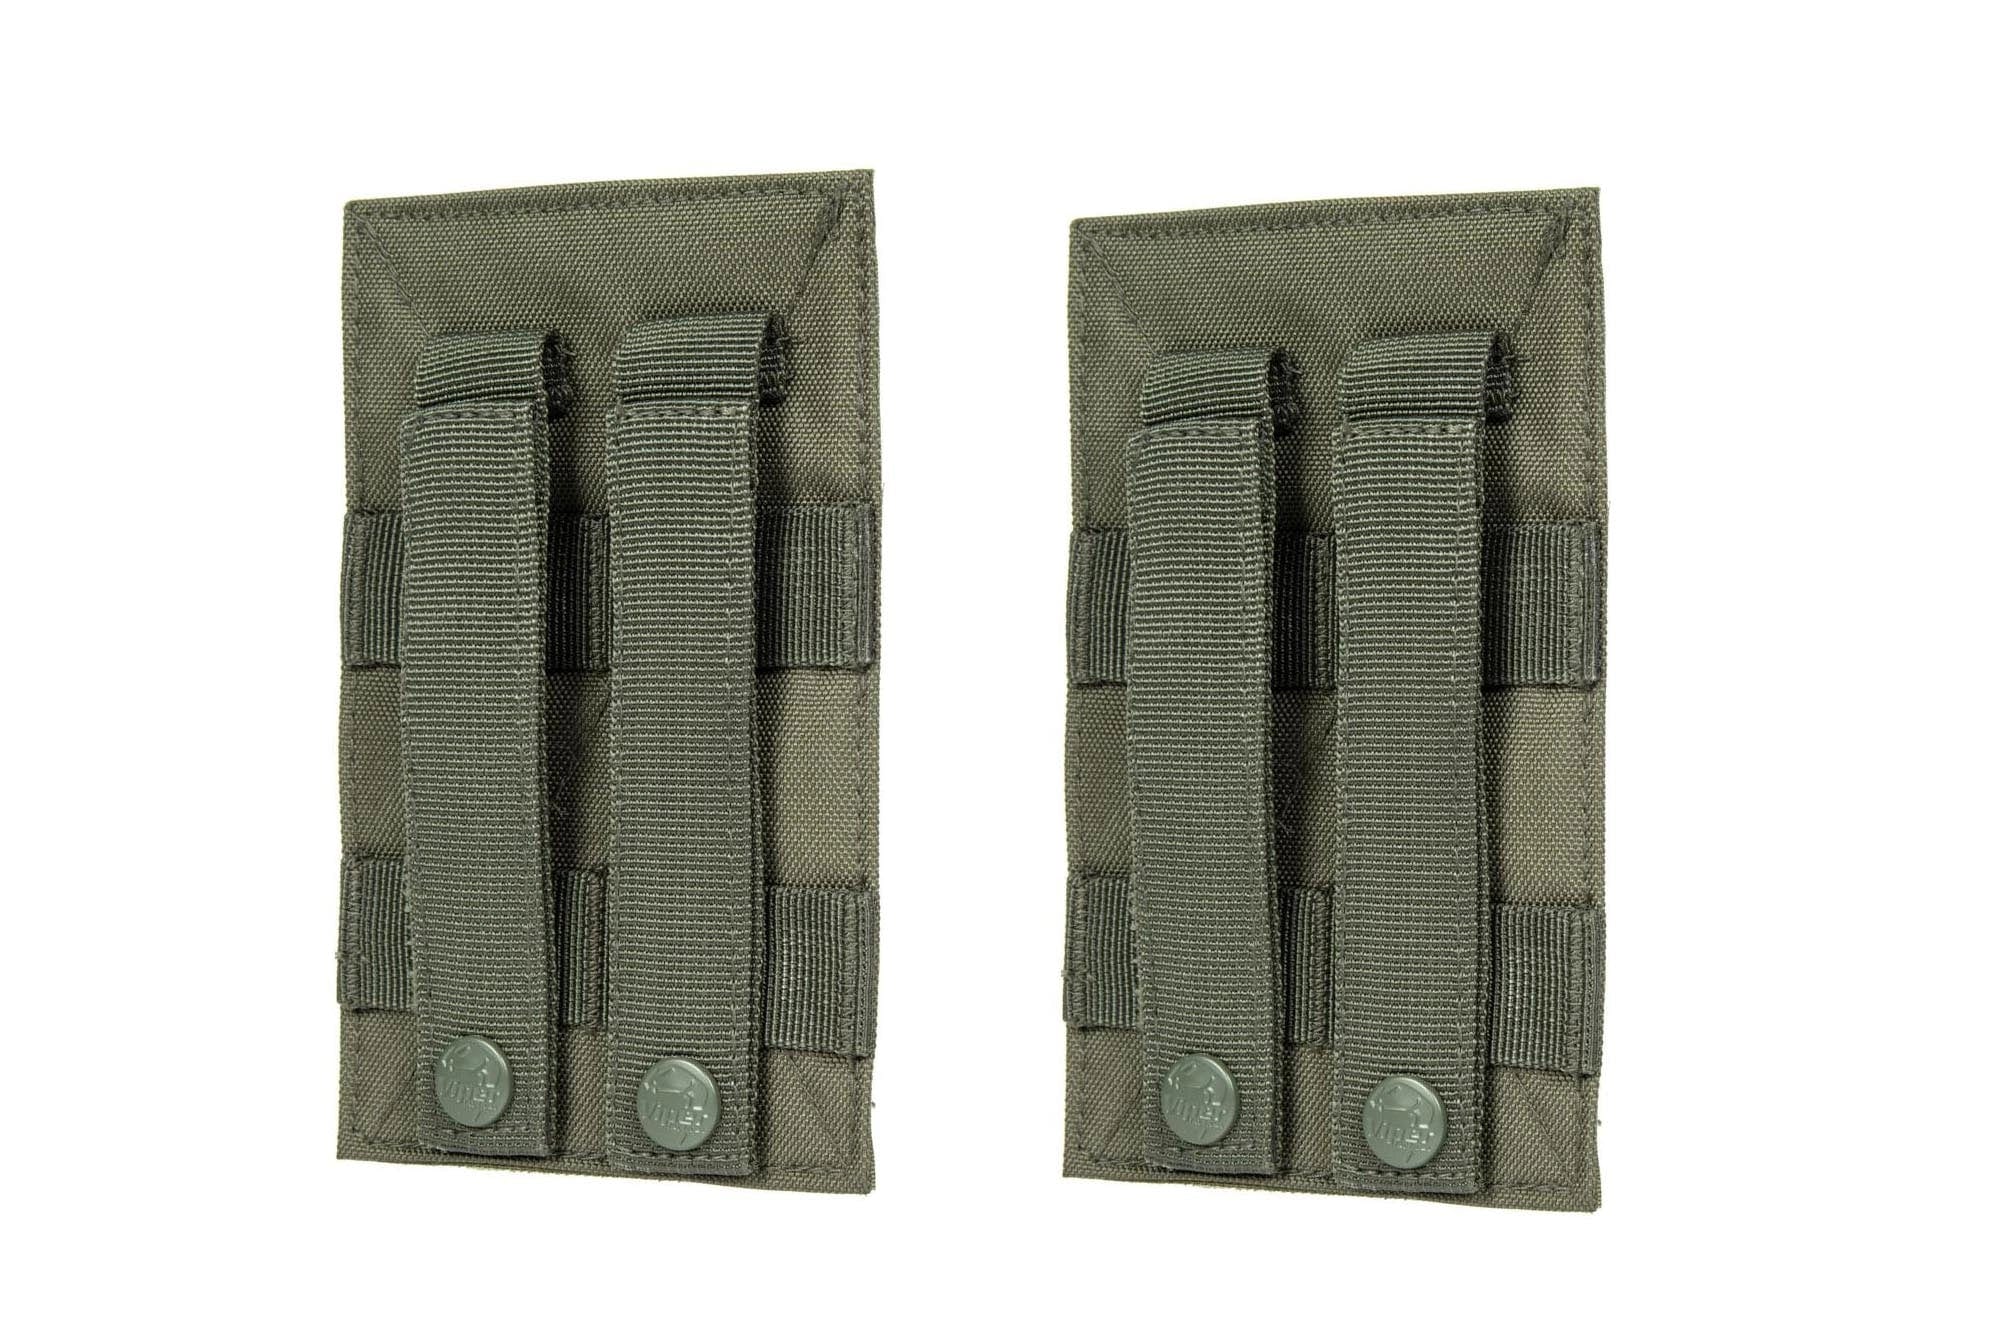 Hook and Loop MOLLE panels set - olive